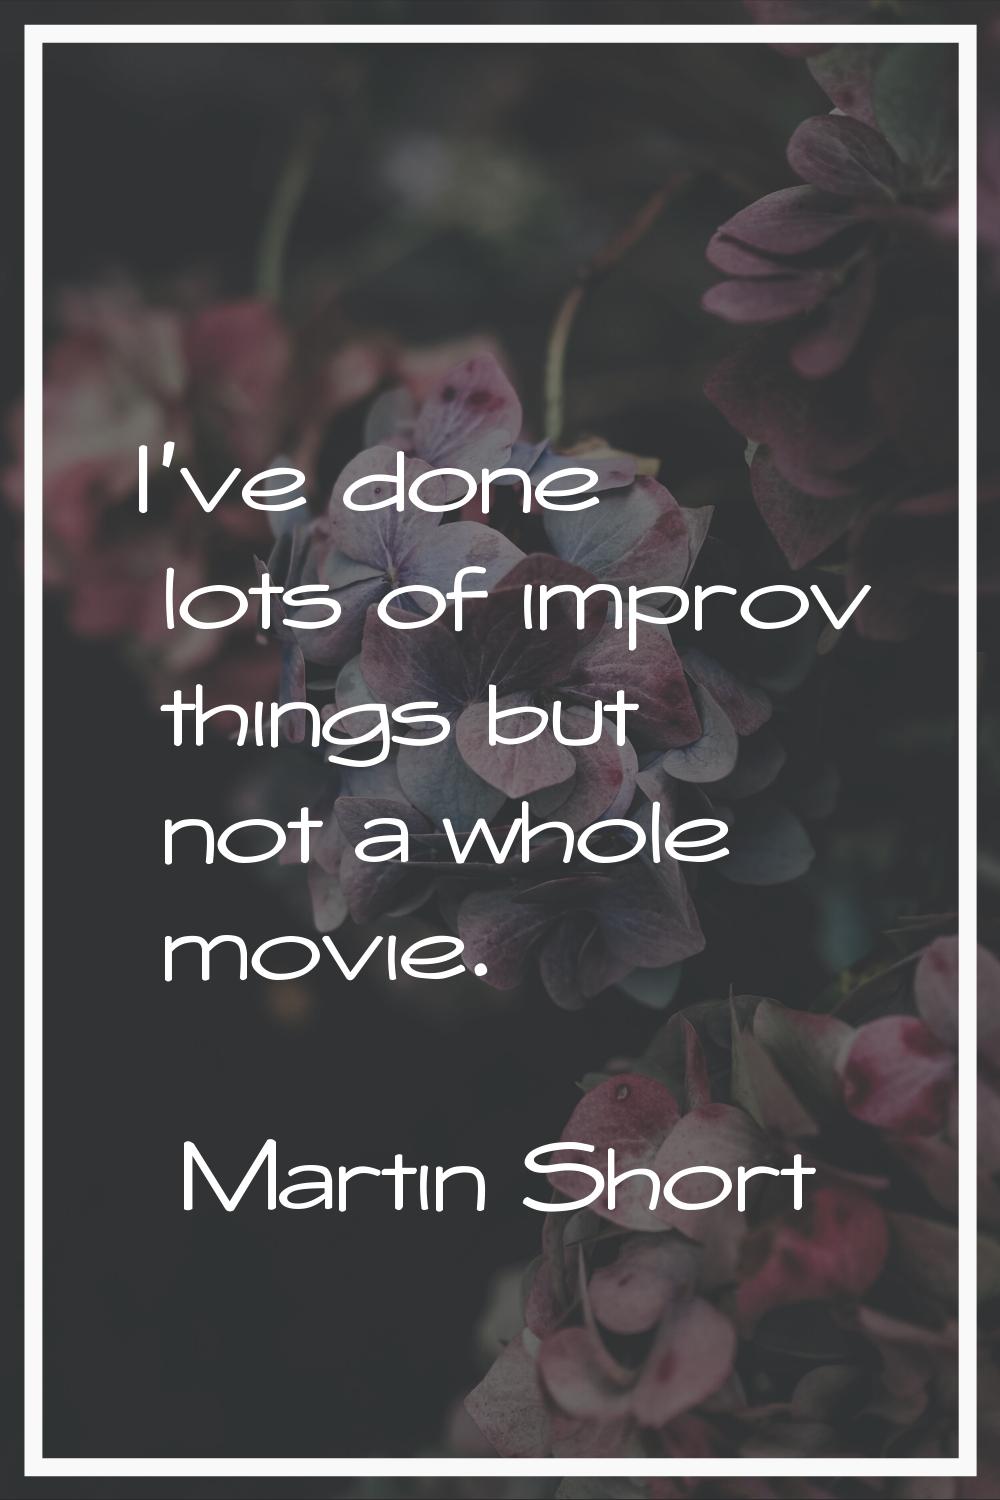 I've done lots of improv things but not a whole movie.